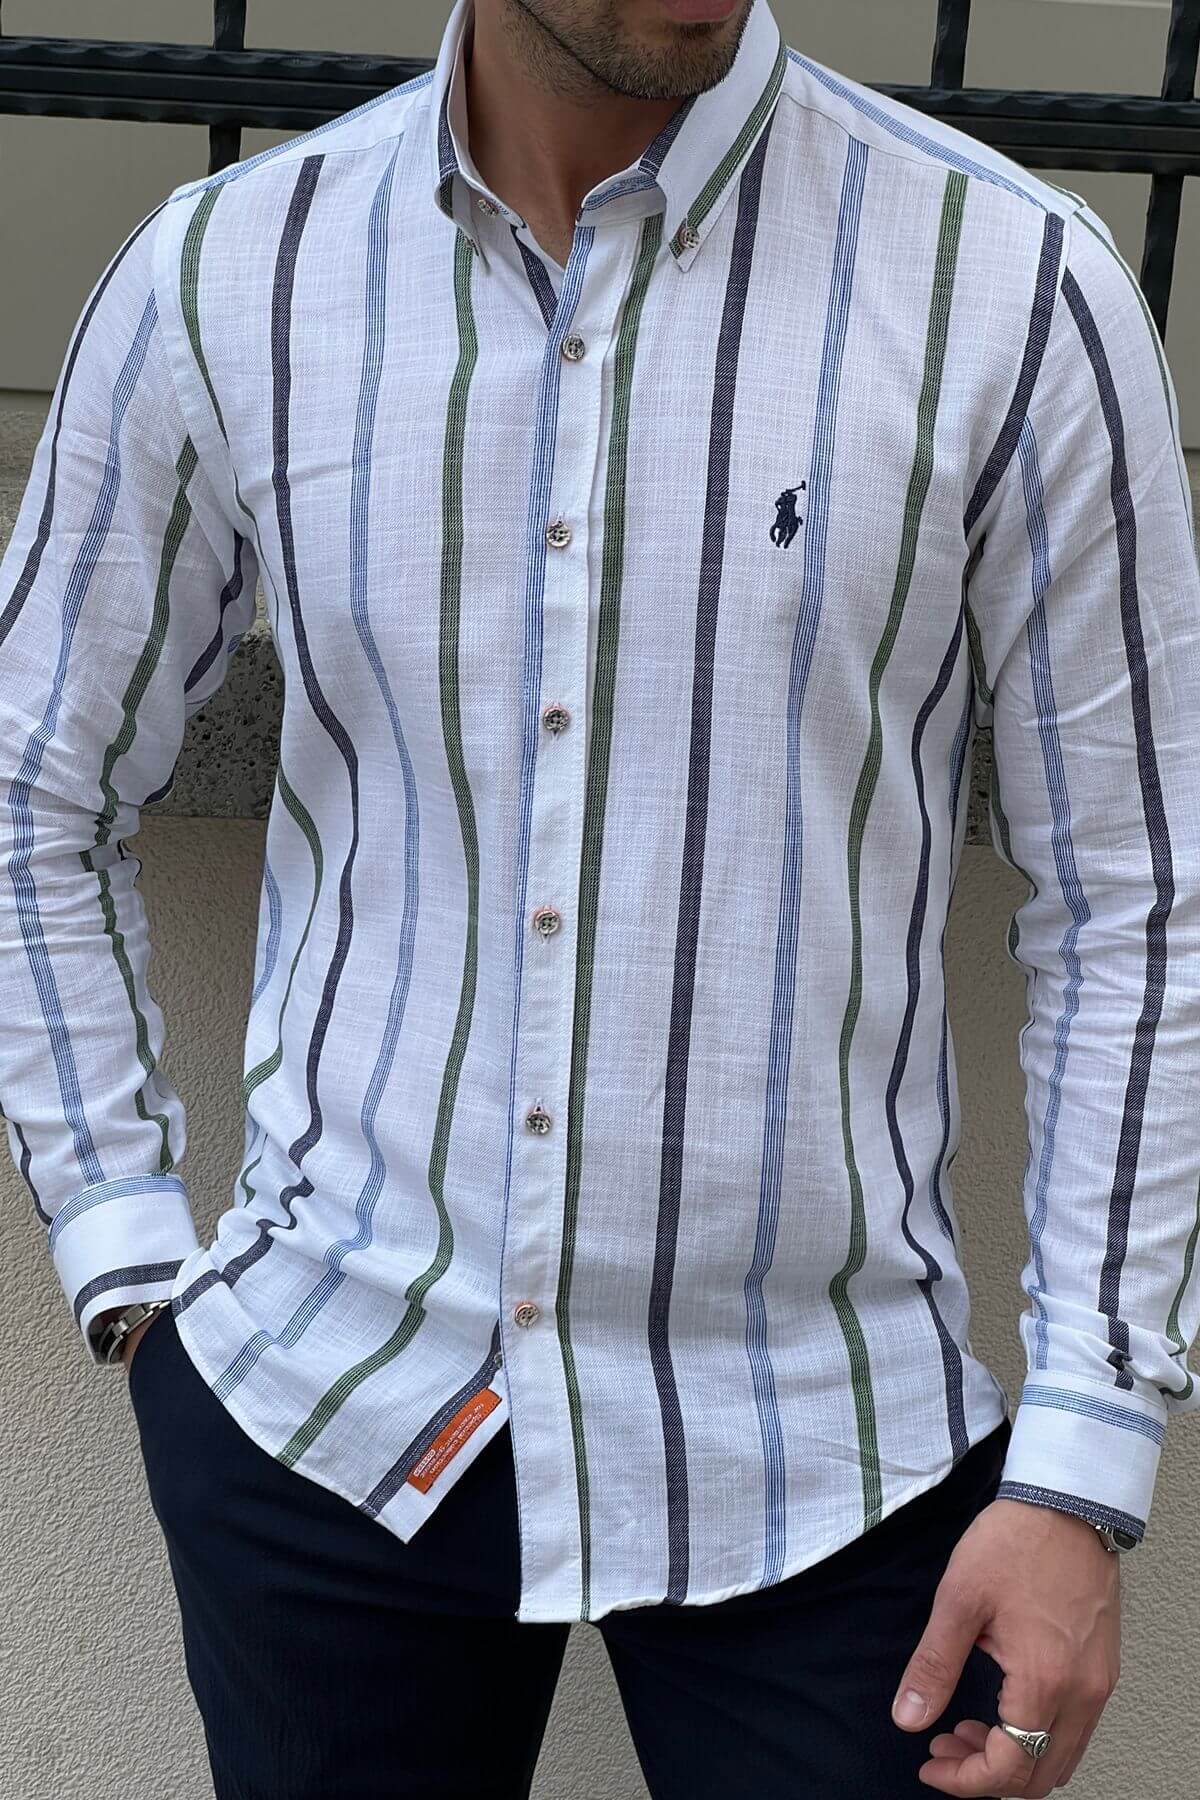 A White and Green Cotton Shirt on display